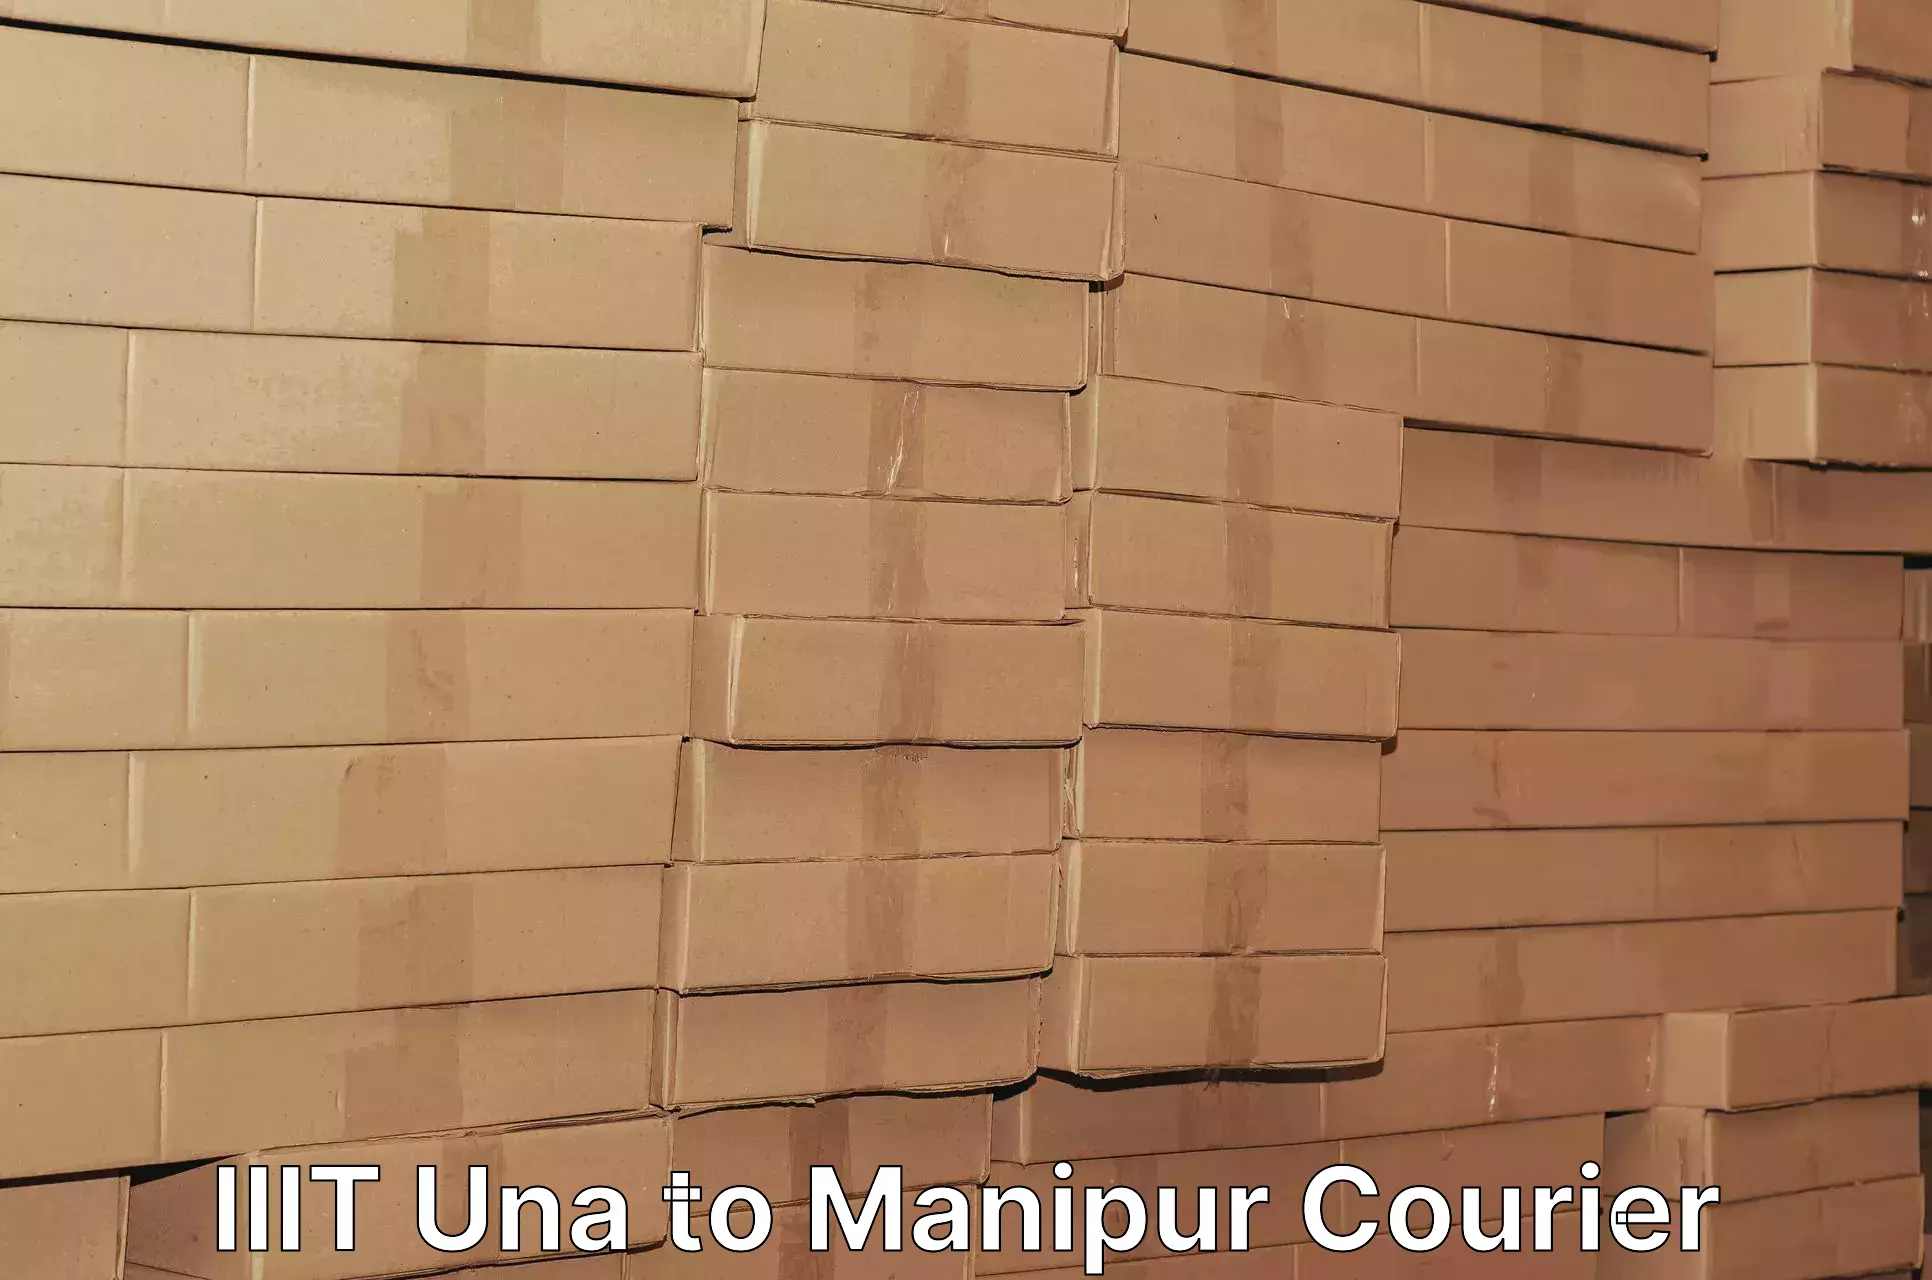 Shipping and handling IIIT Una to Manipur